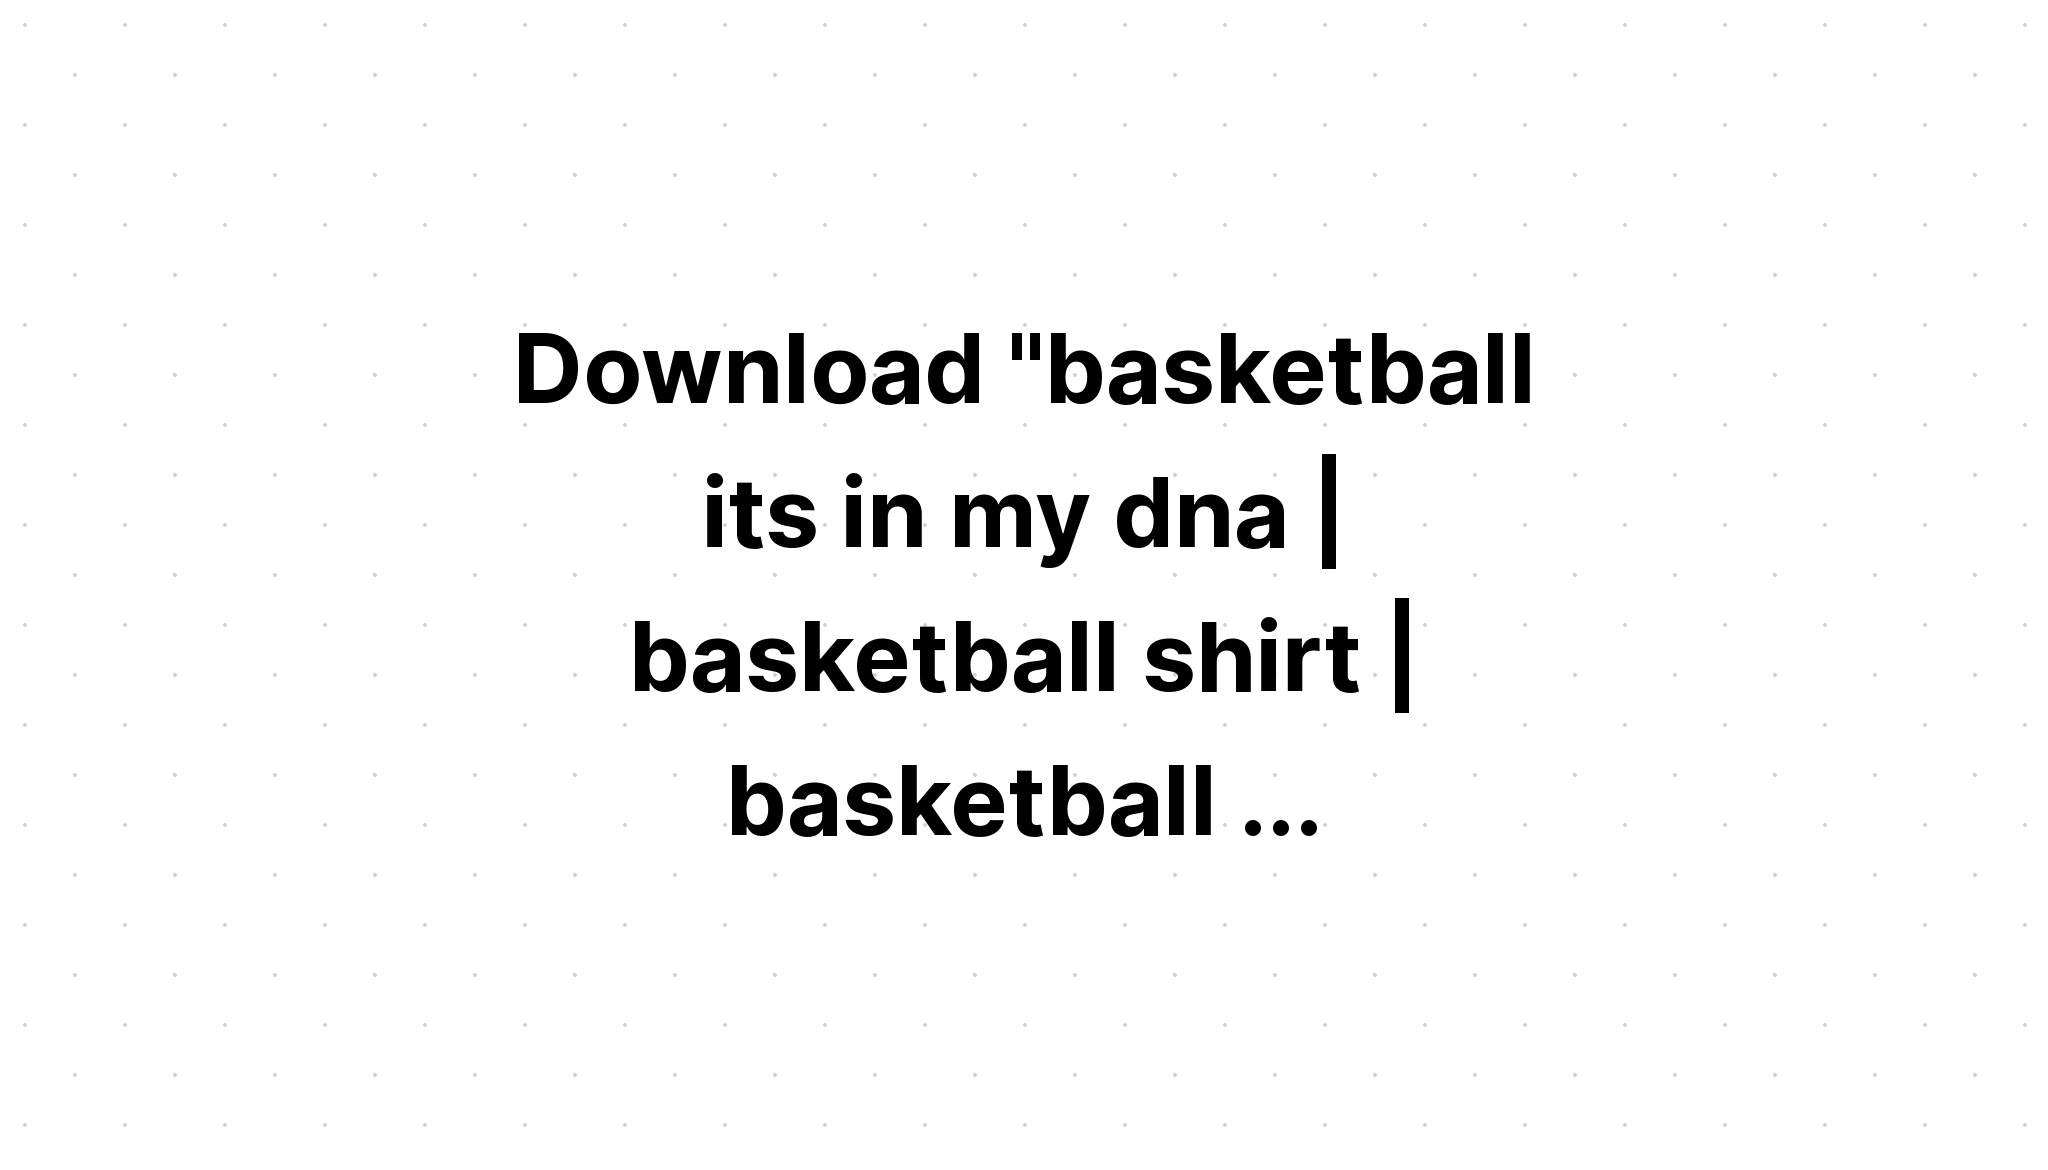 Download Basketball It's In My Dna?? SVG File